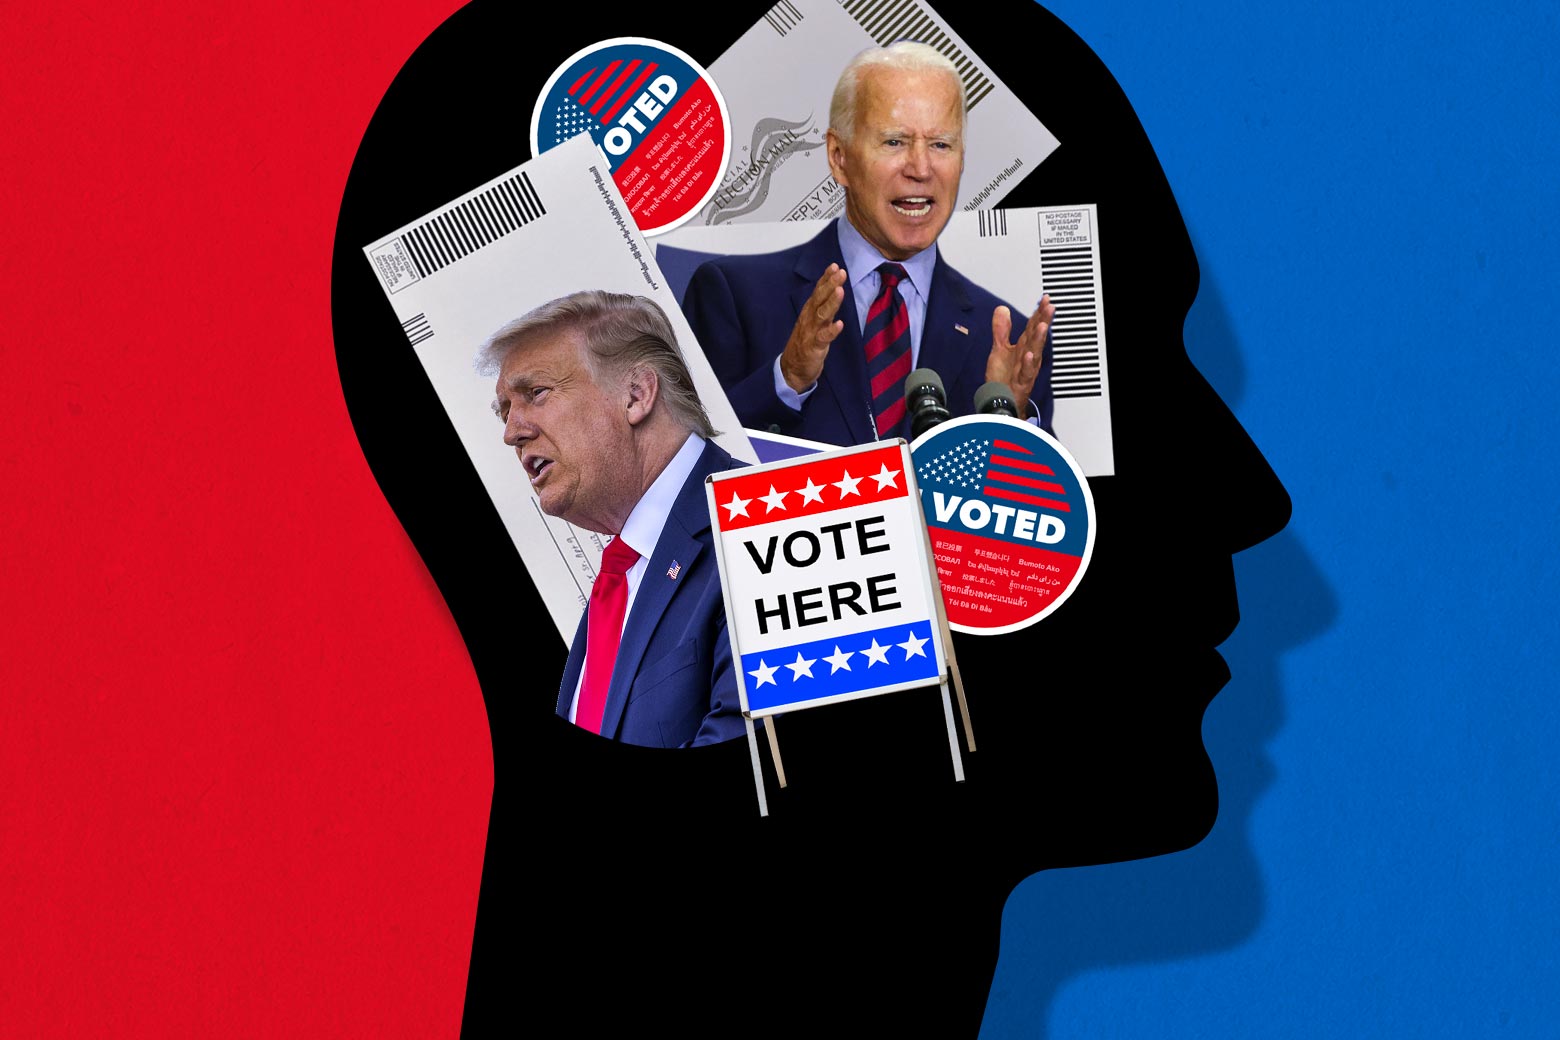 A silhouette of a human head with ballots, voting signs and stickers, Donald Trump, and Joe Biden inside of it.